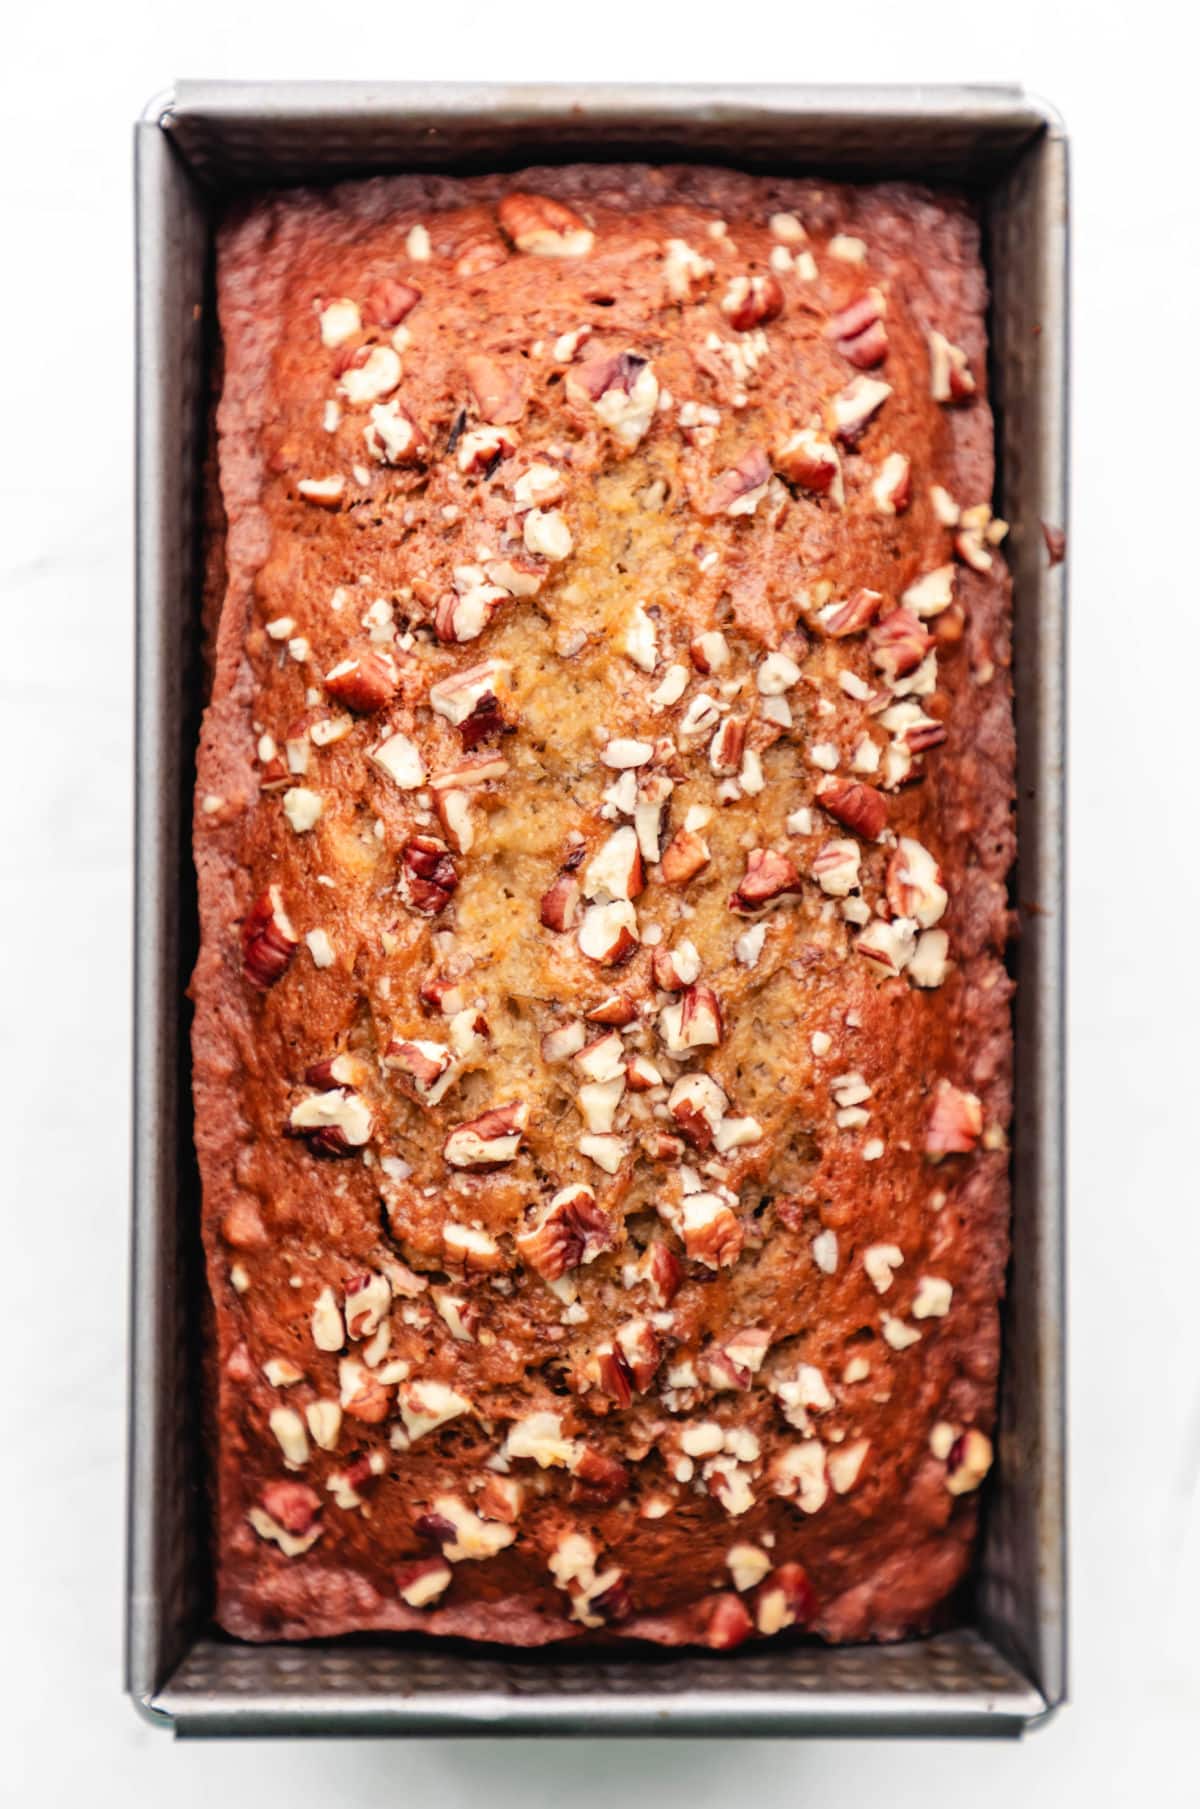 A loaf of banana nut bread in the baking pan.